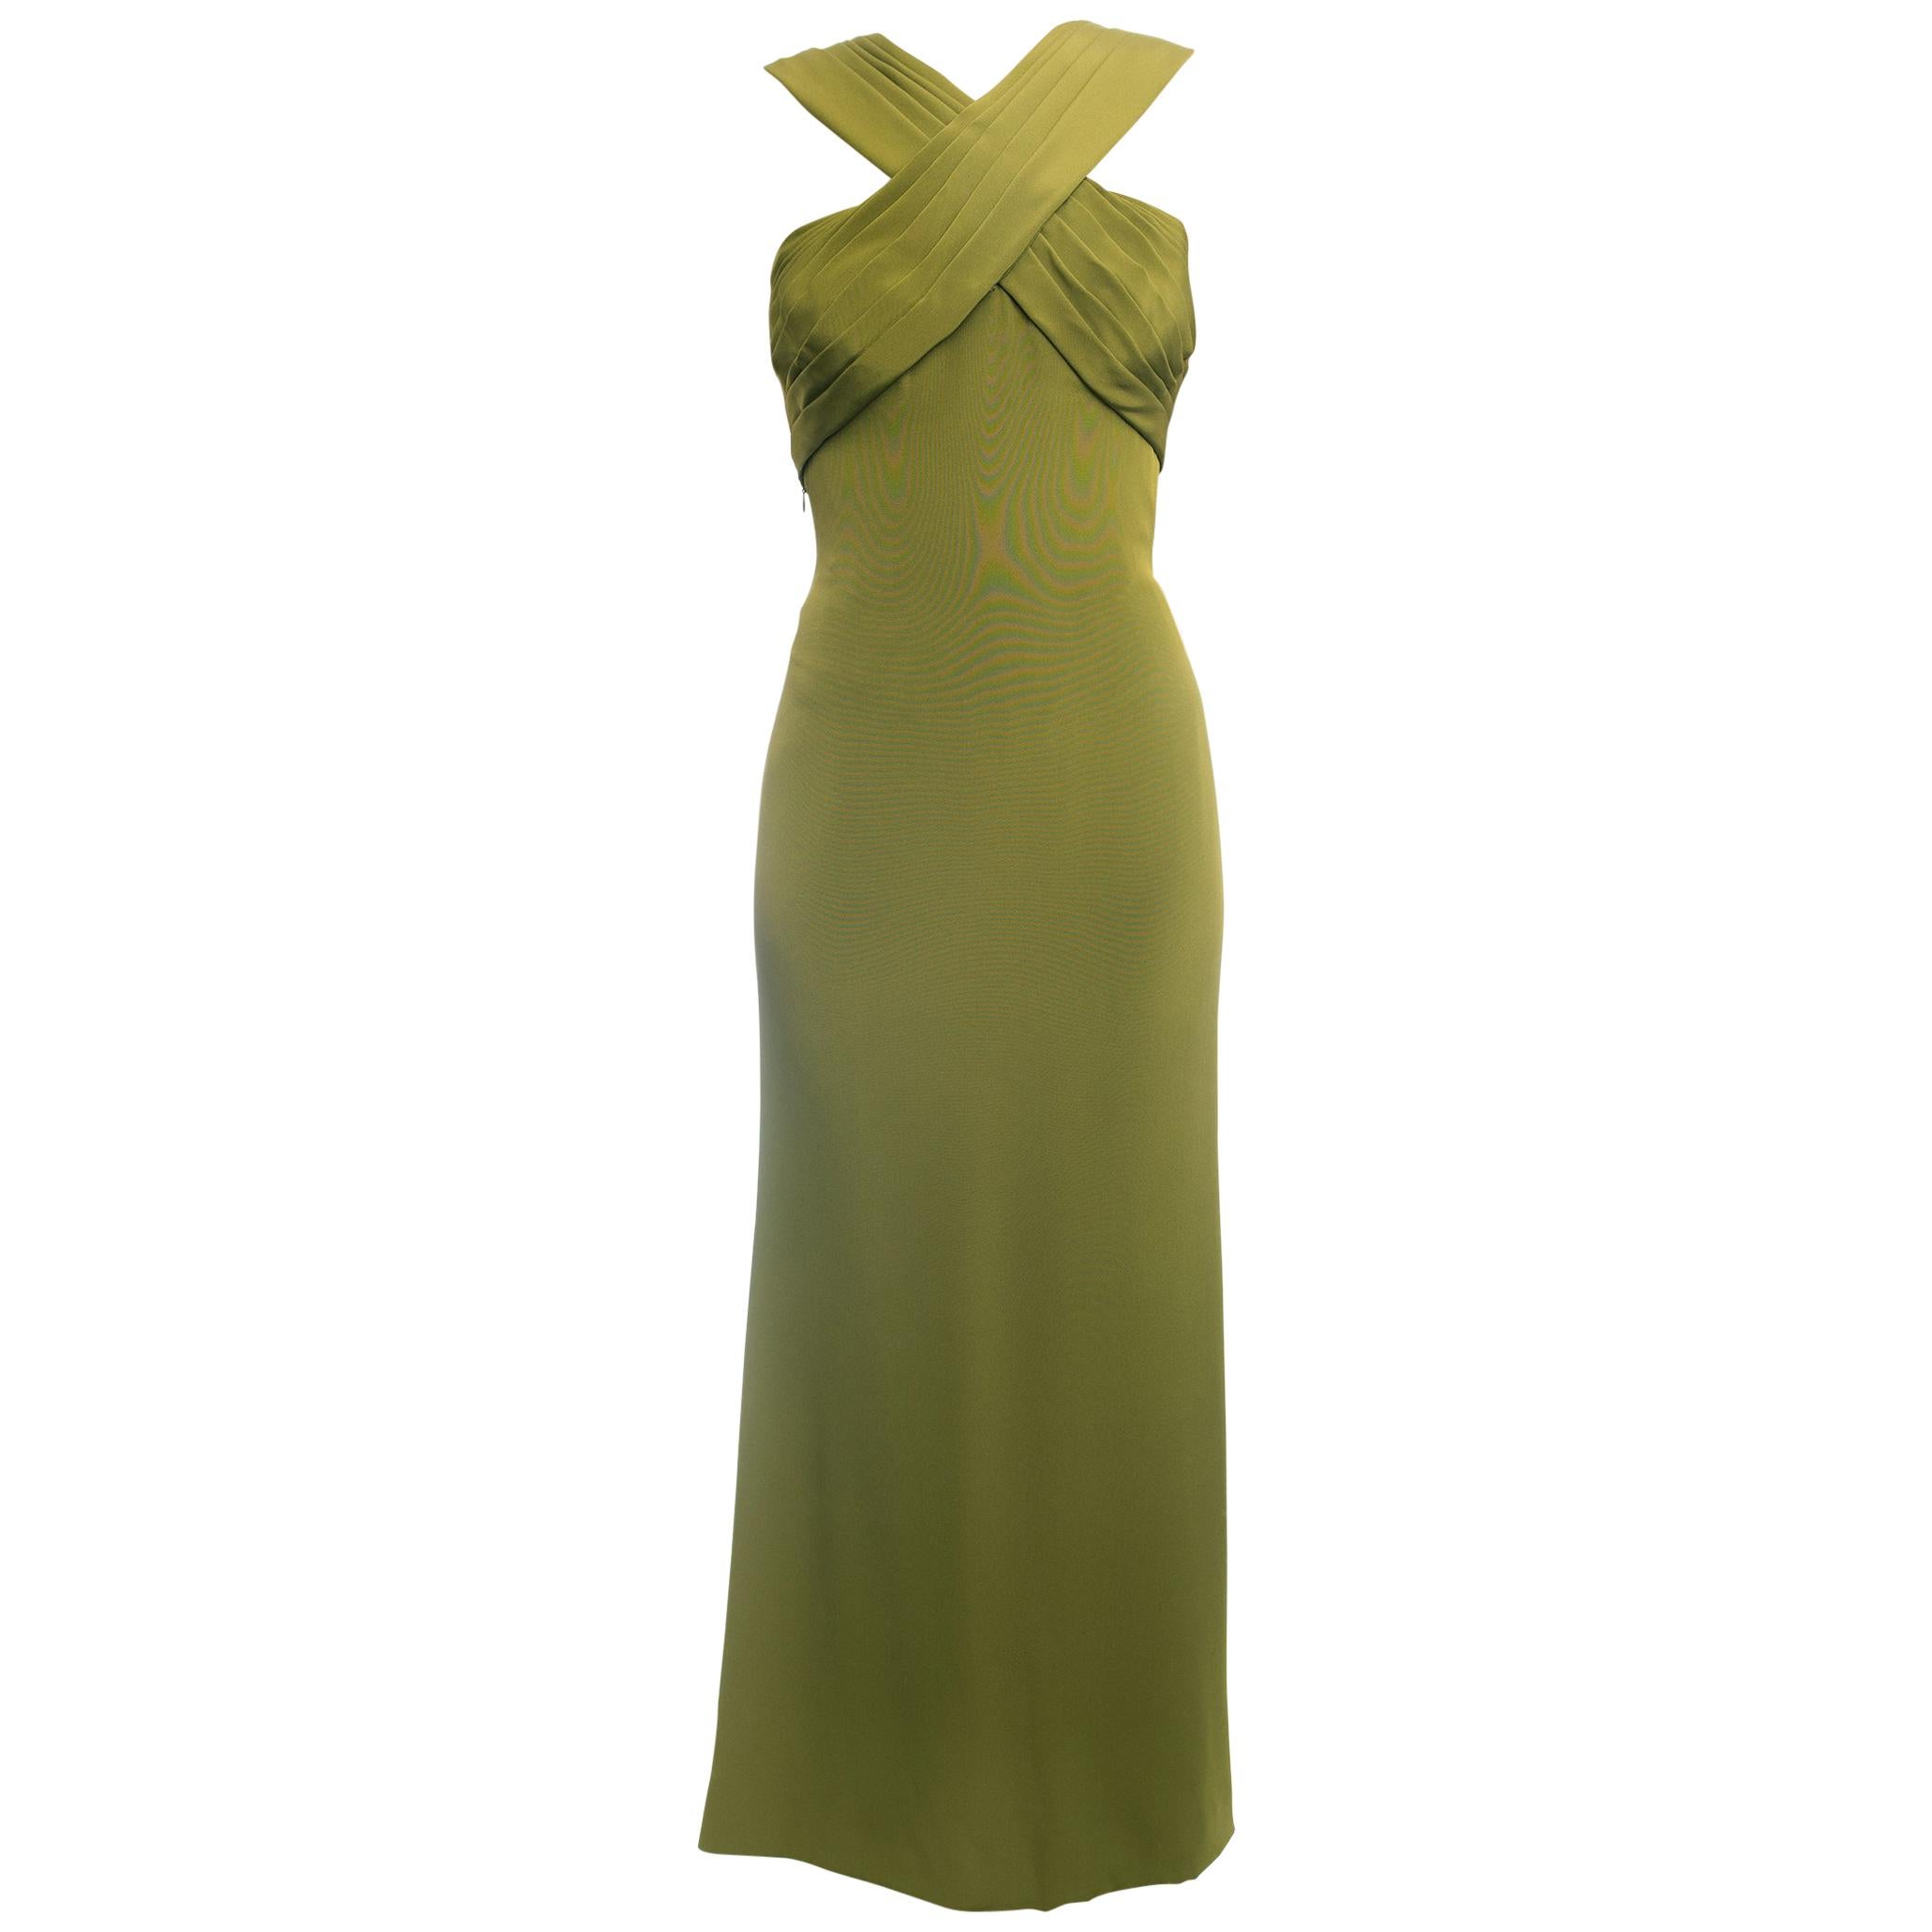 Yves Saint Laurent Haute Couture Vintage 1990’s Olive Green Gown For Sale